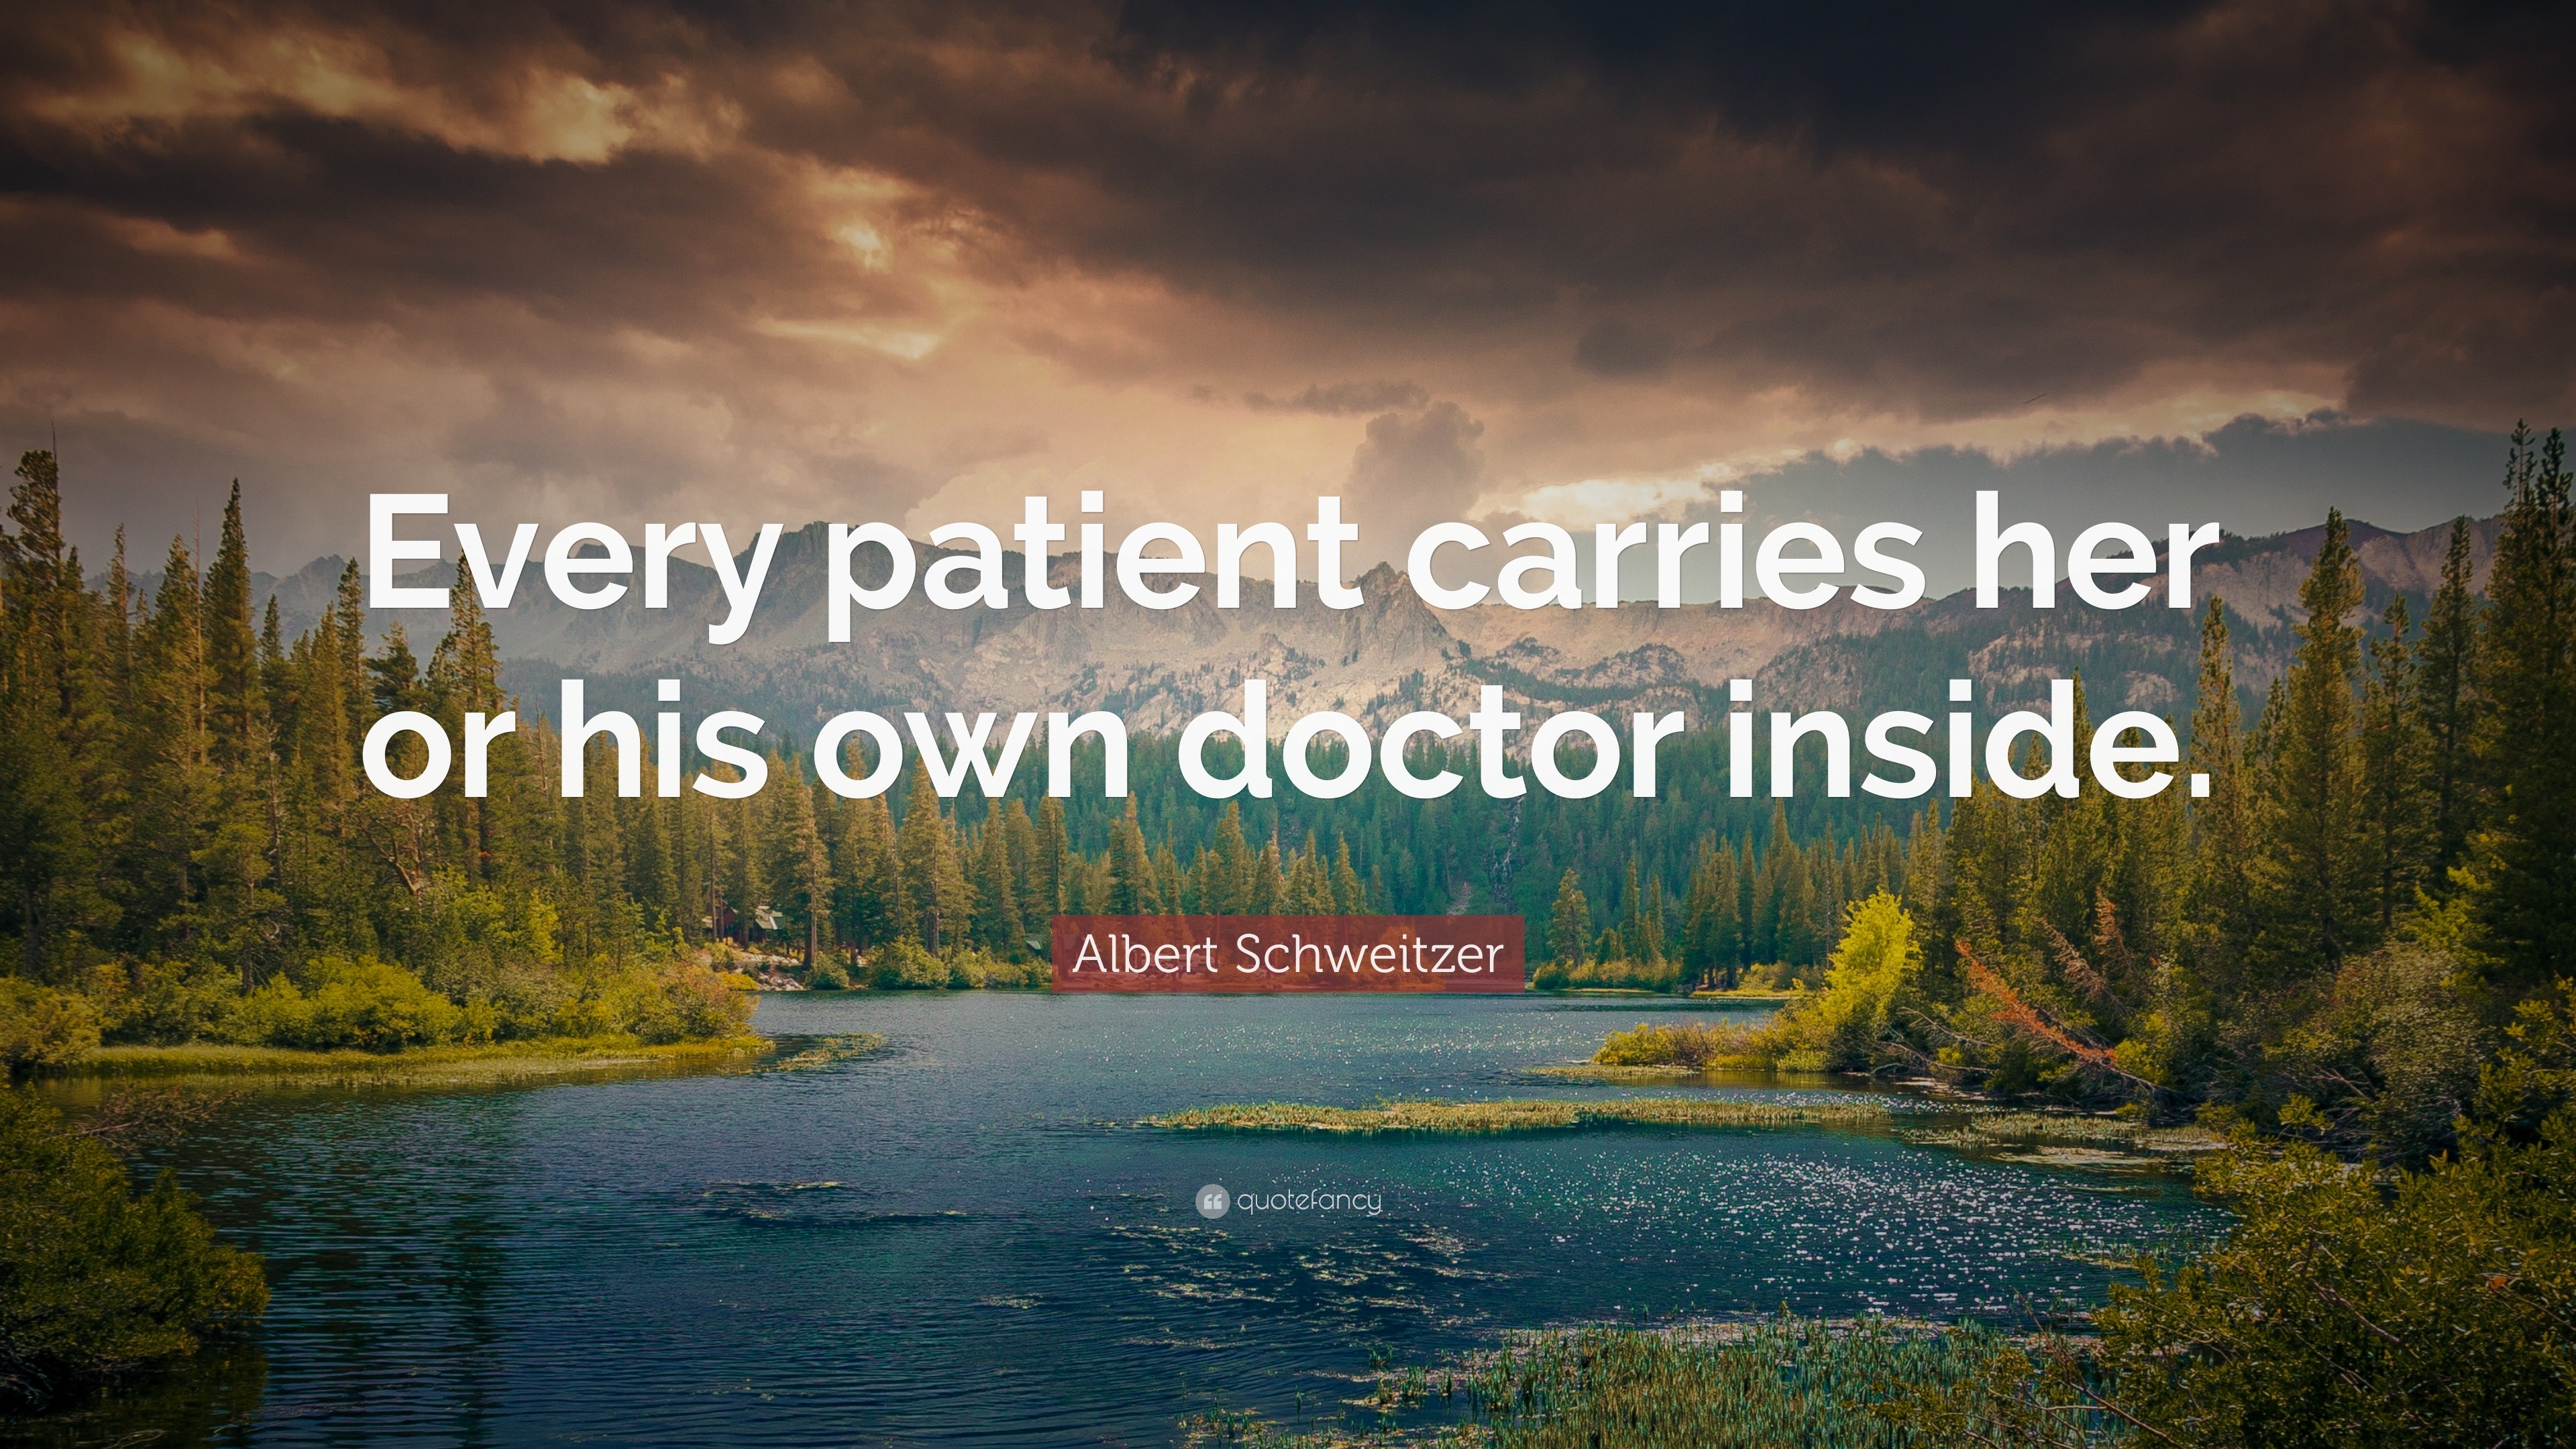 3840x2160 Health Quotes: “Every patient carries her or his own doctor inside.” —